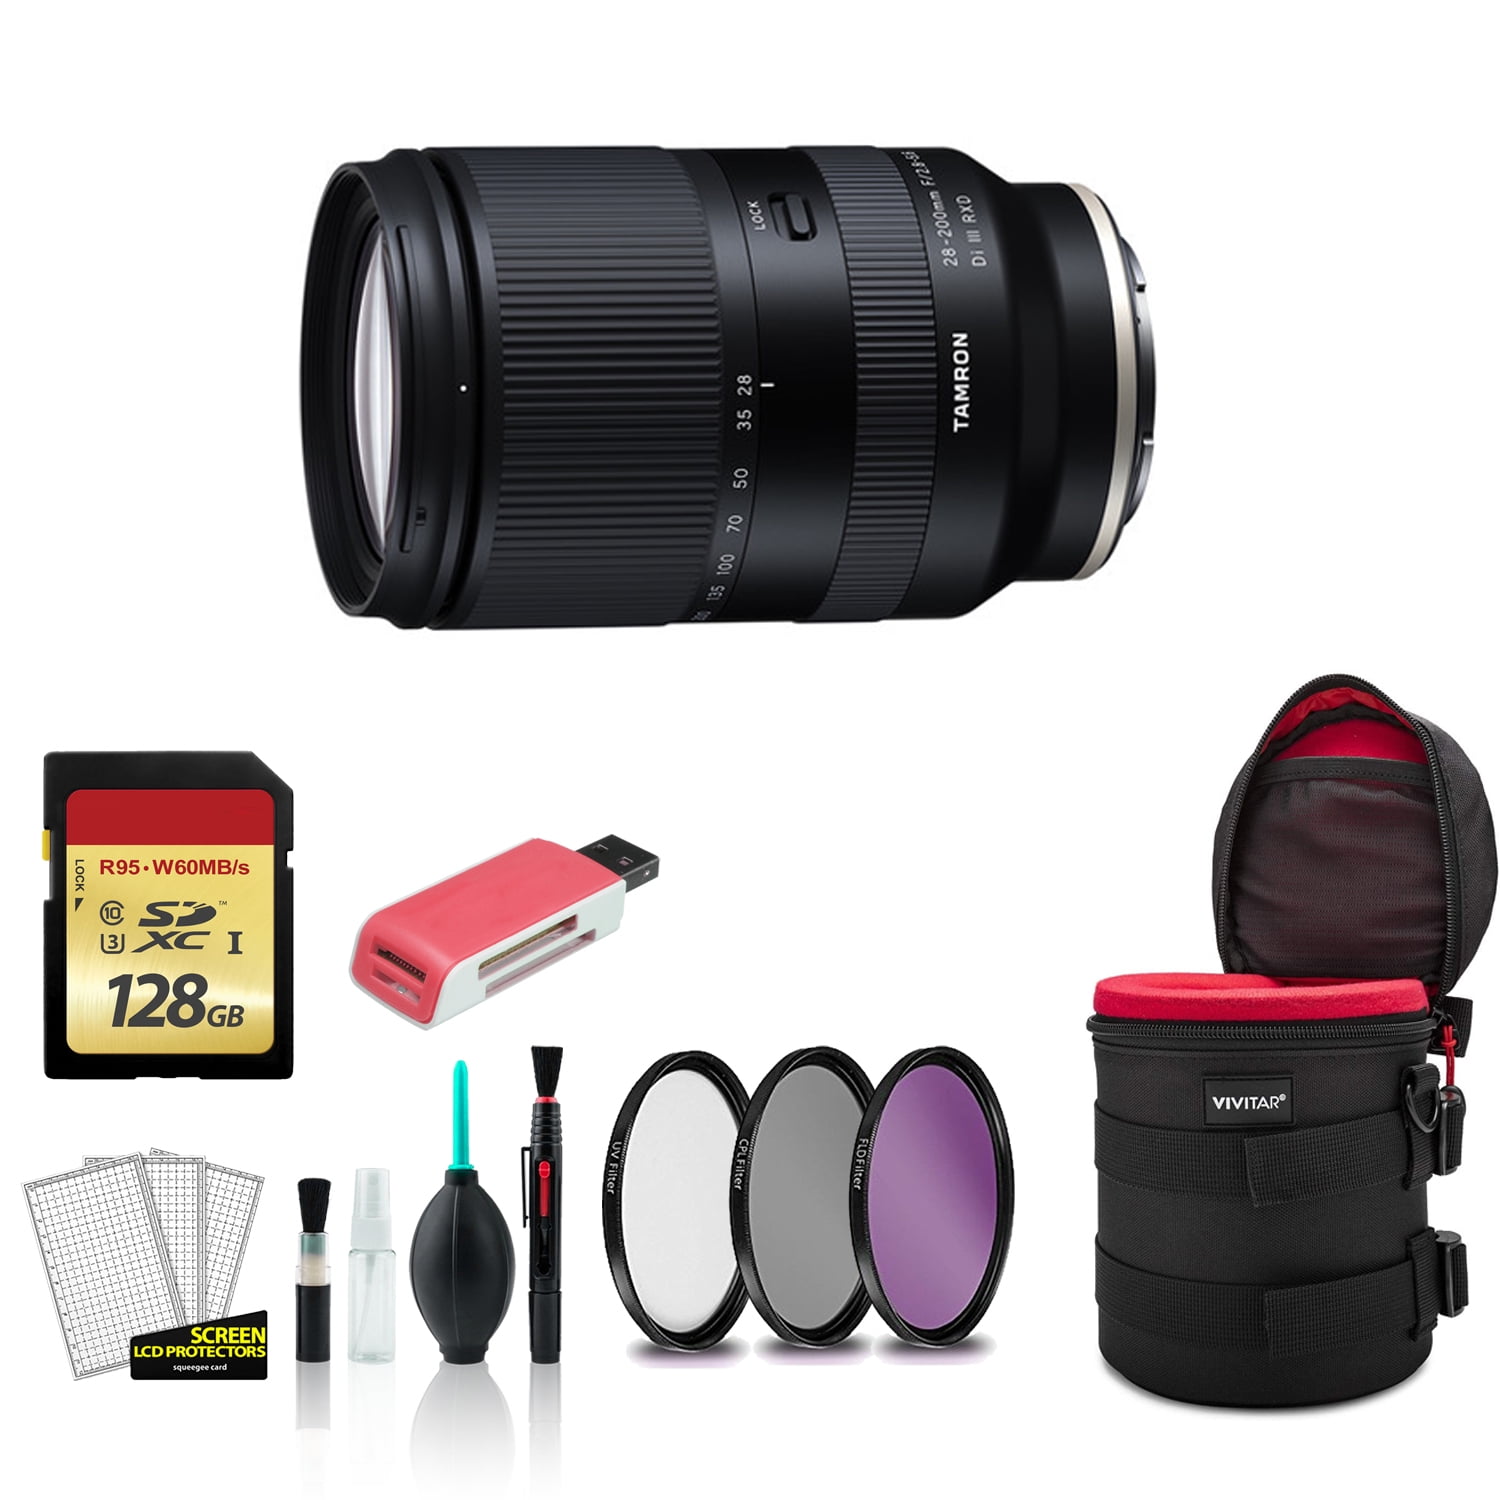 Tamron 28-200mm for Sony E f/2.8-5.6 Di III RXD Lens with 128GB Memory Card  + Padded Case + More (International Model)